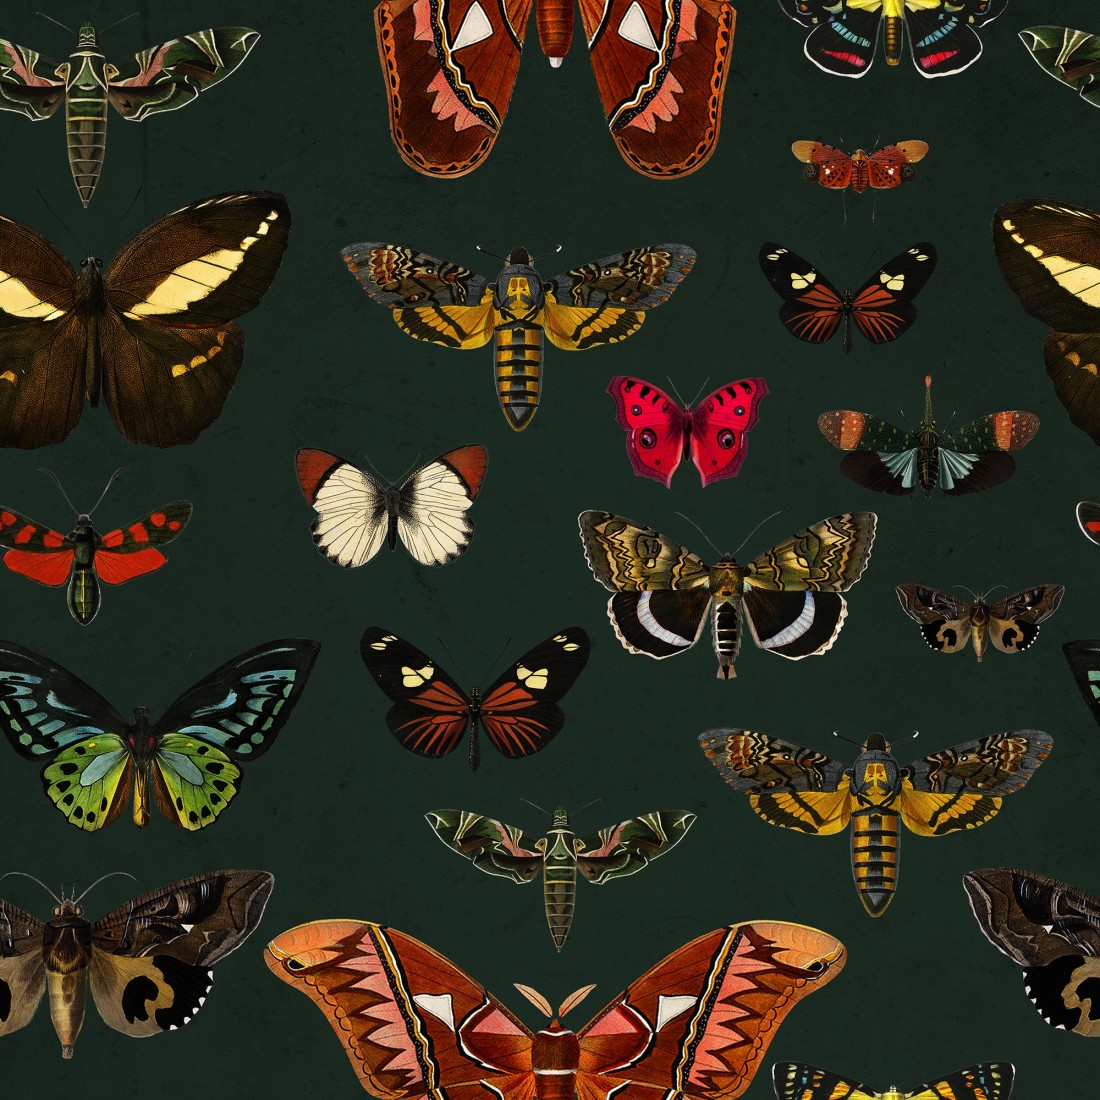 Colorful Butterfly Patterns on Green Background Wallpaper Mural • Wallmur®